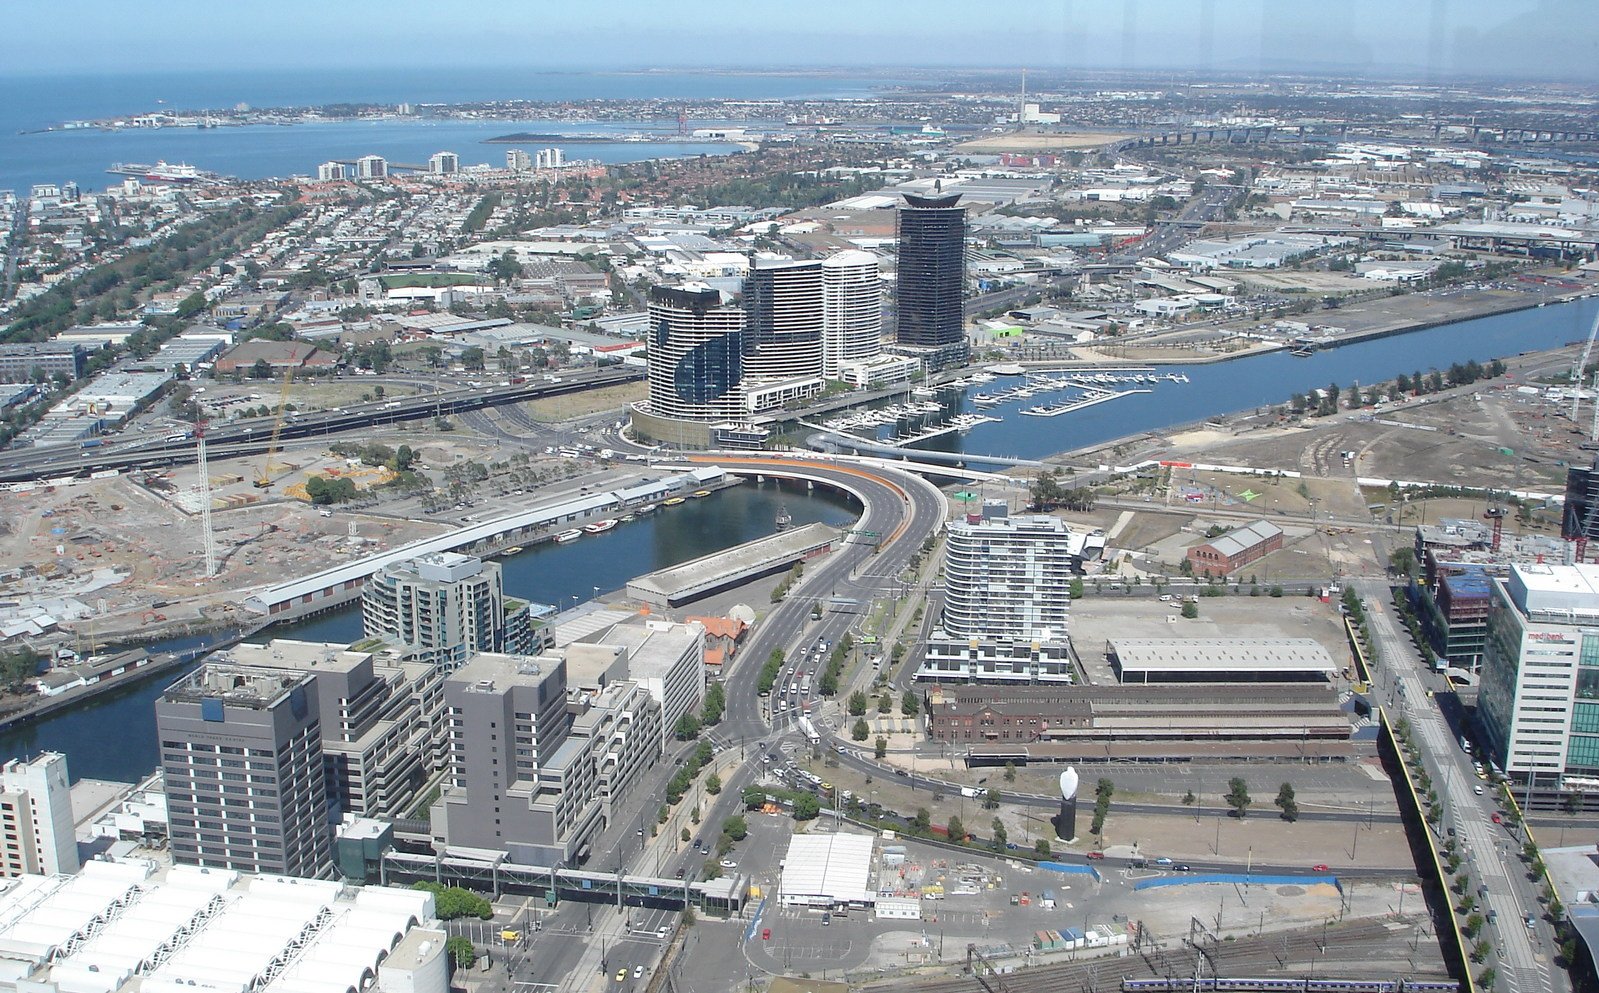 a bird's eye view shows a river, buildings, and the sea